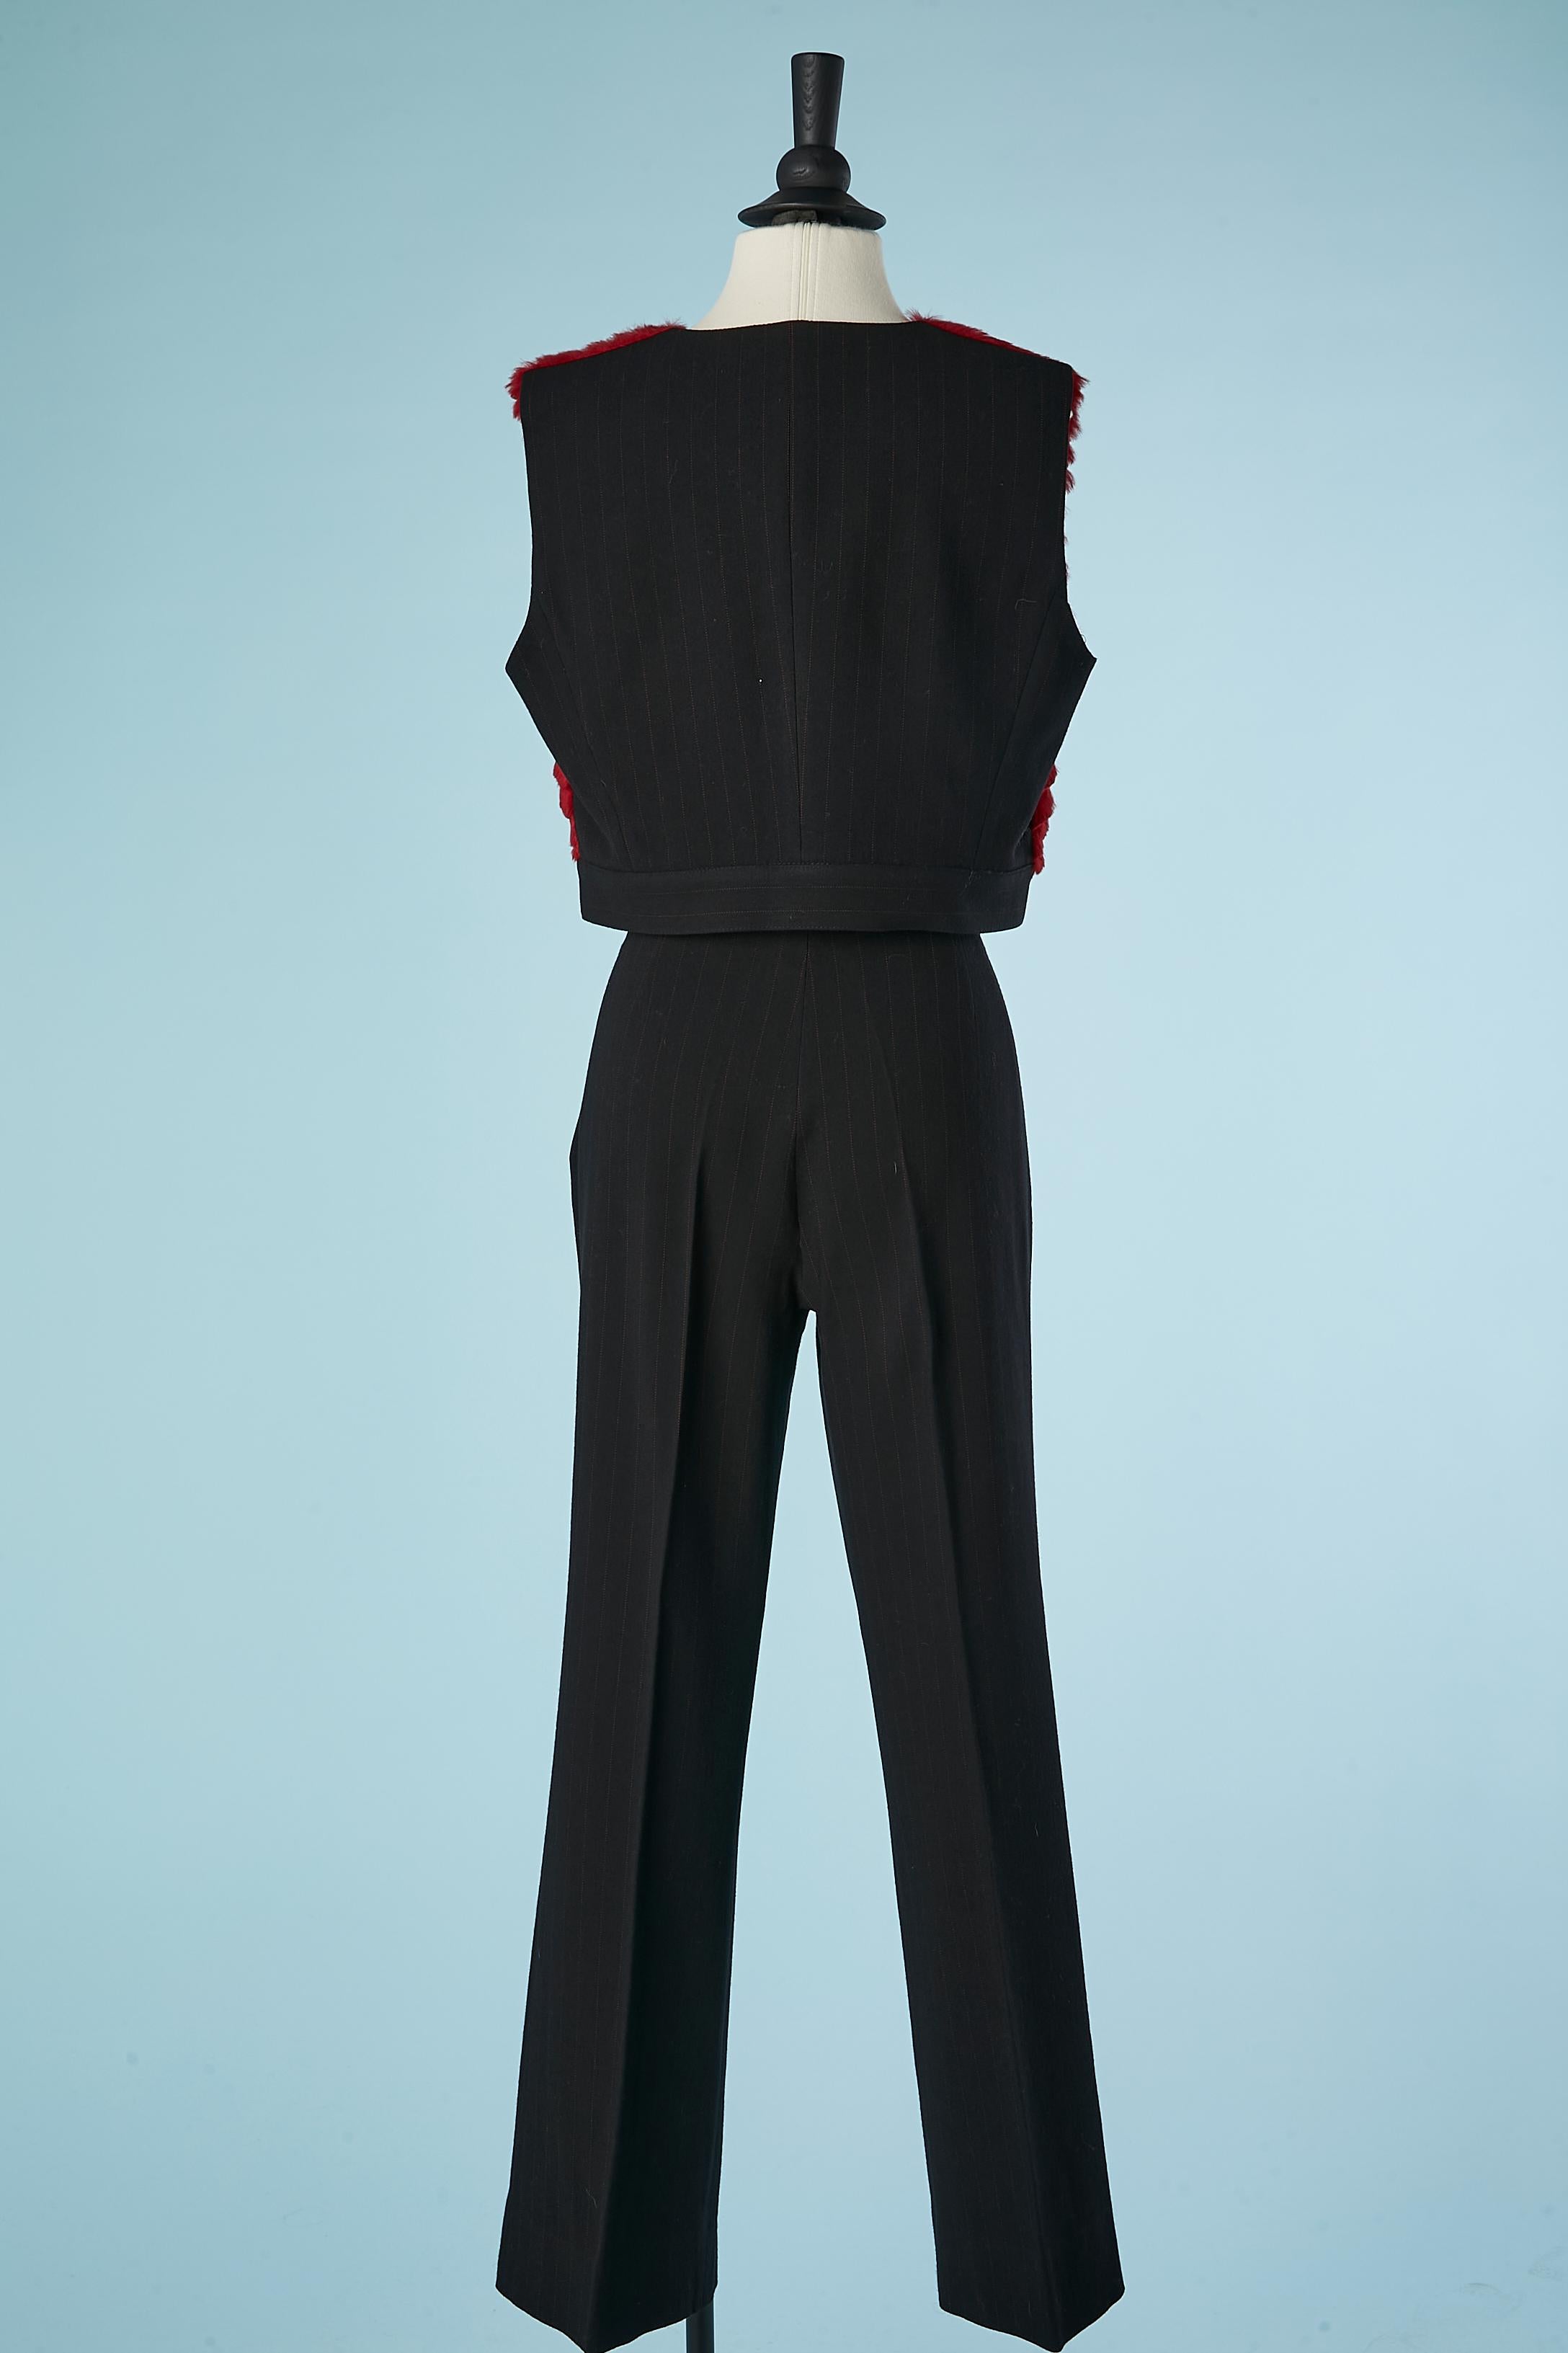 Black wool and red pin-stripe trouser-suit and fur vest Gianfranco Ferré Studio For Sale 7